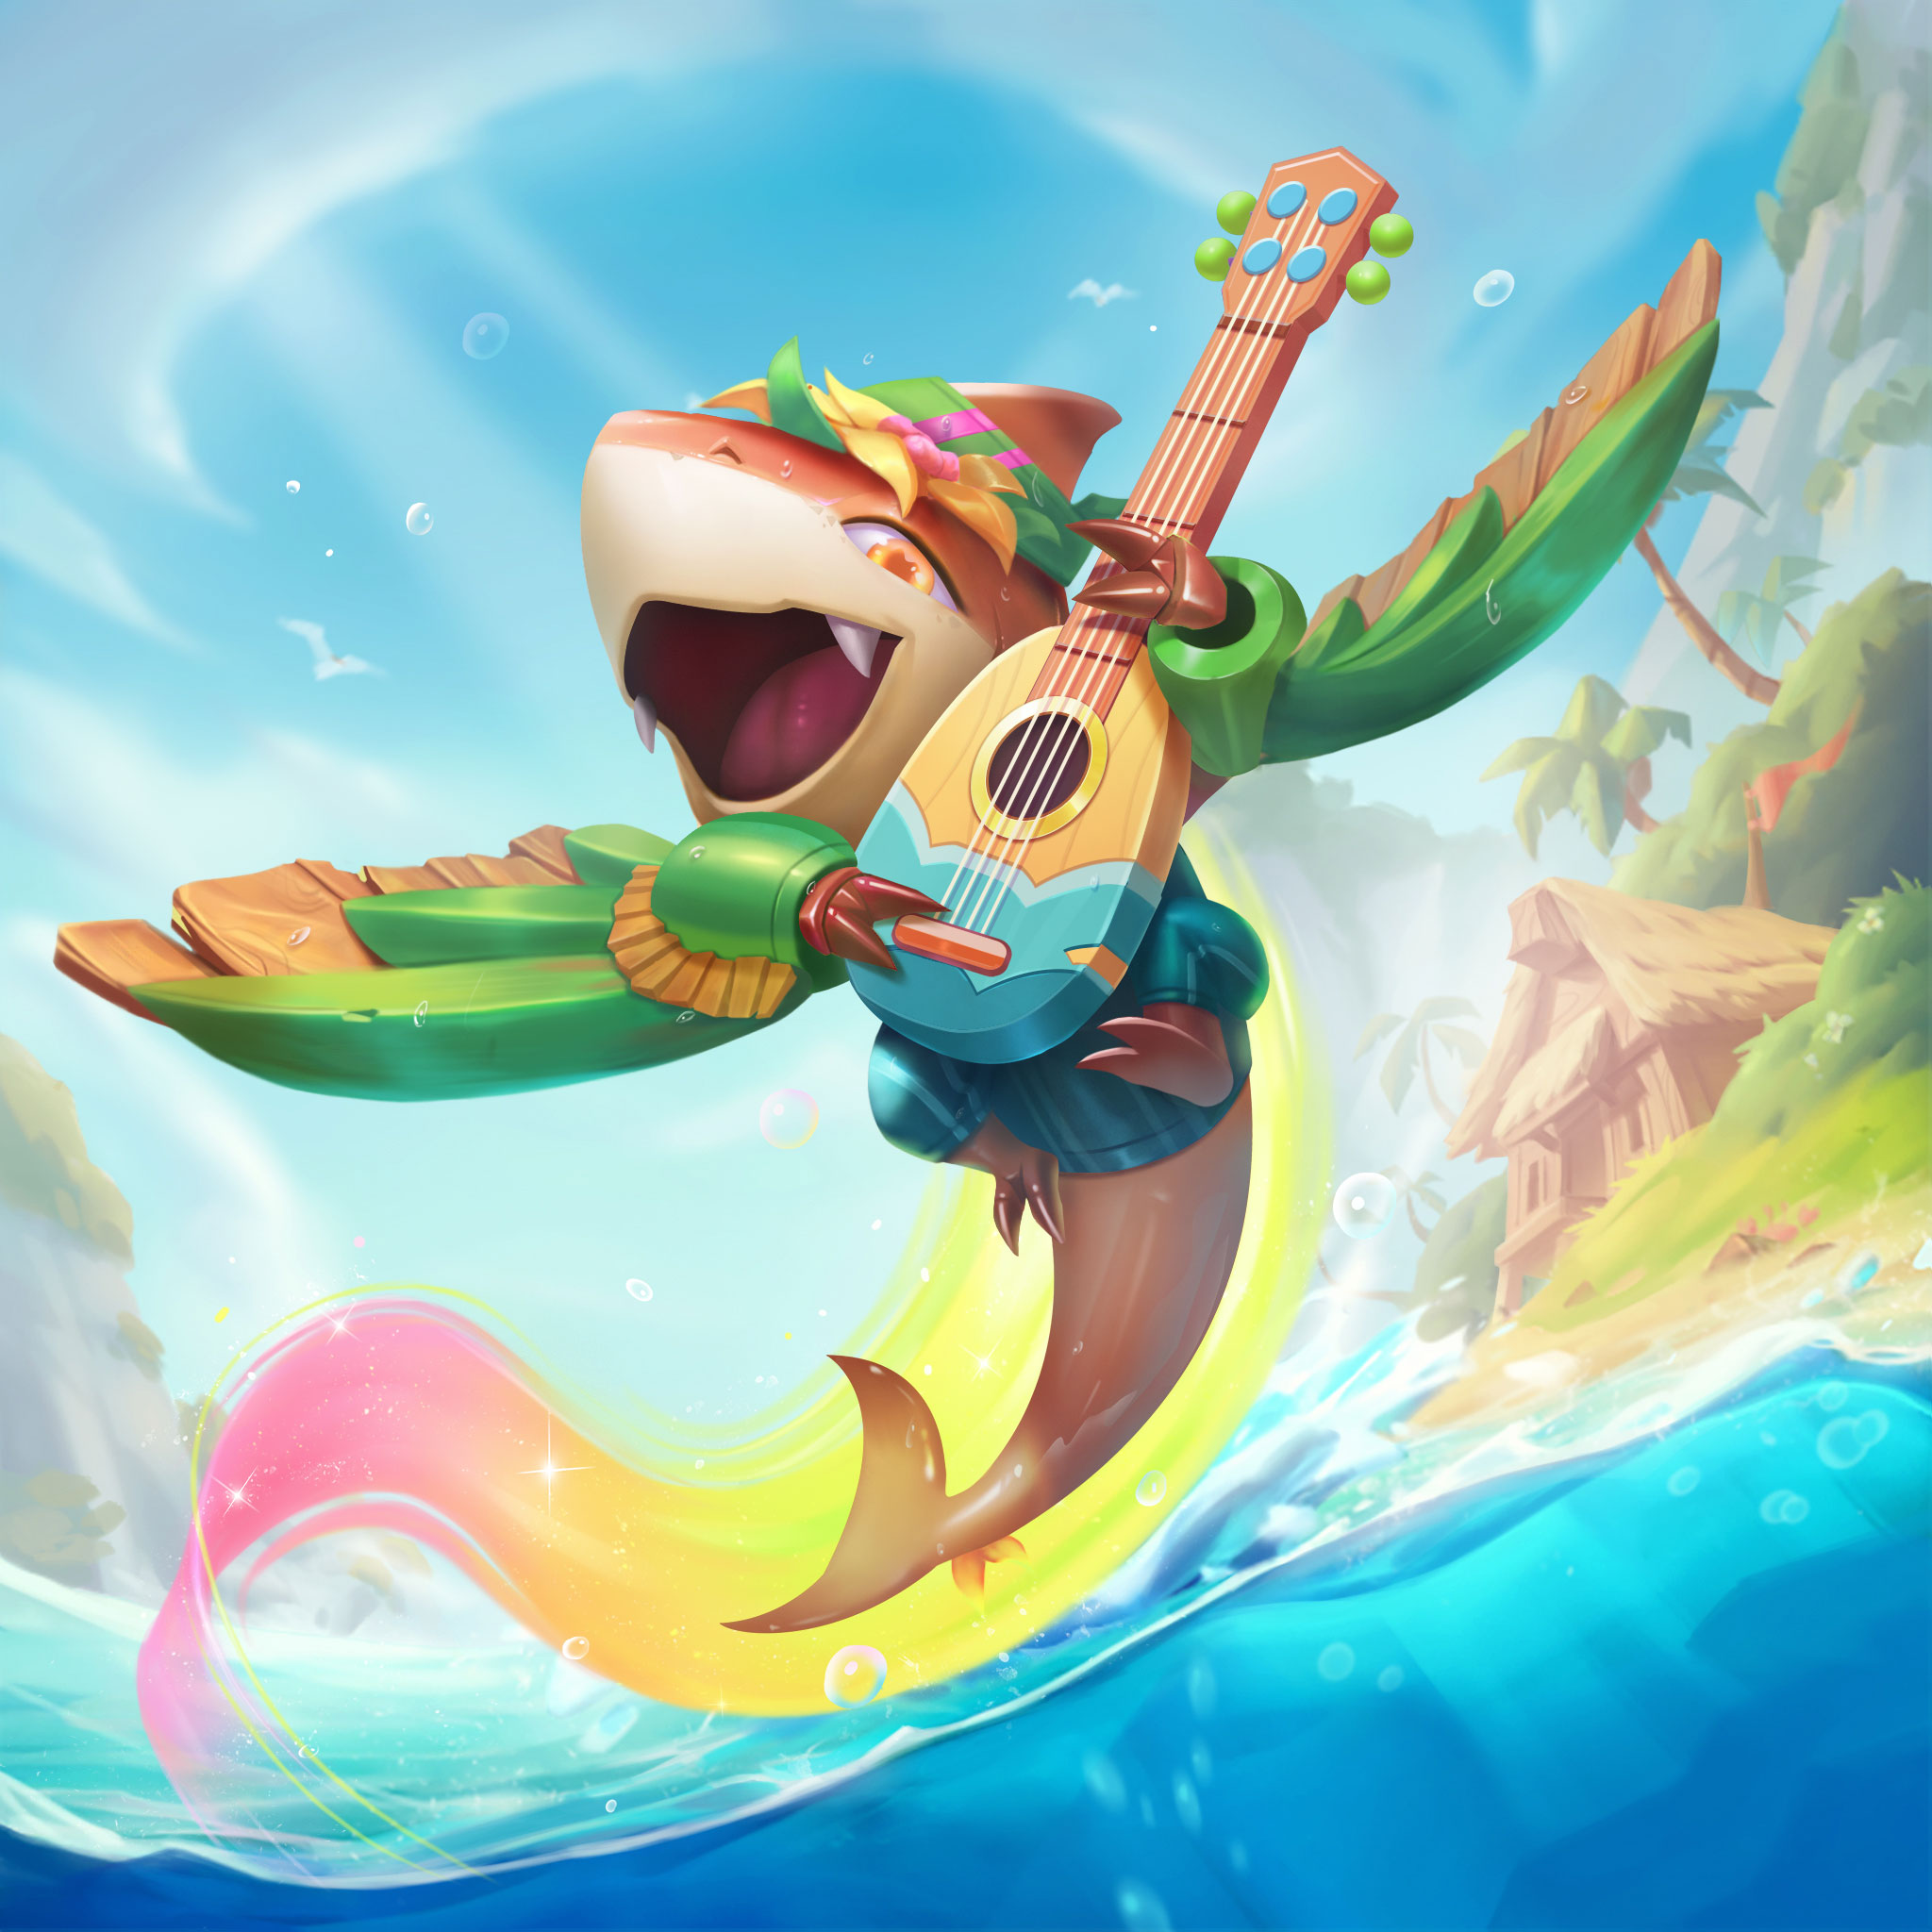 TFT 12.15 Patch notes